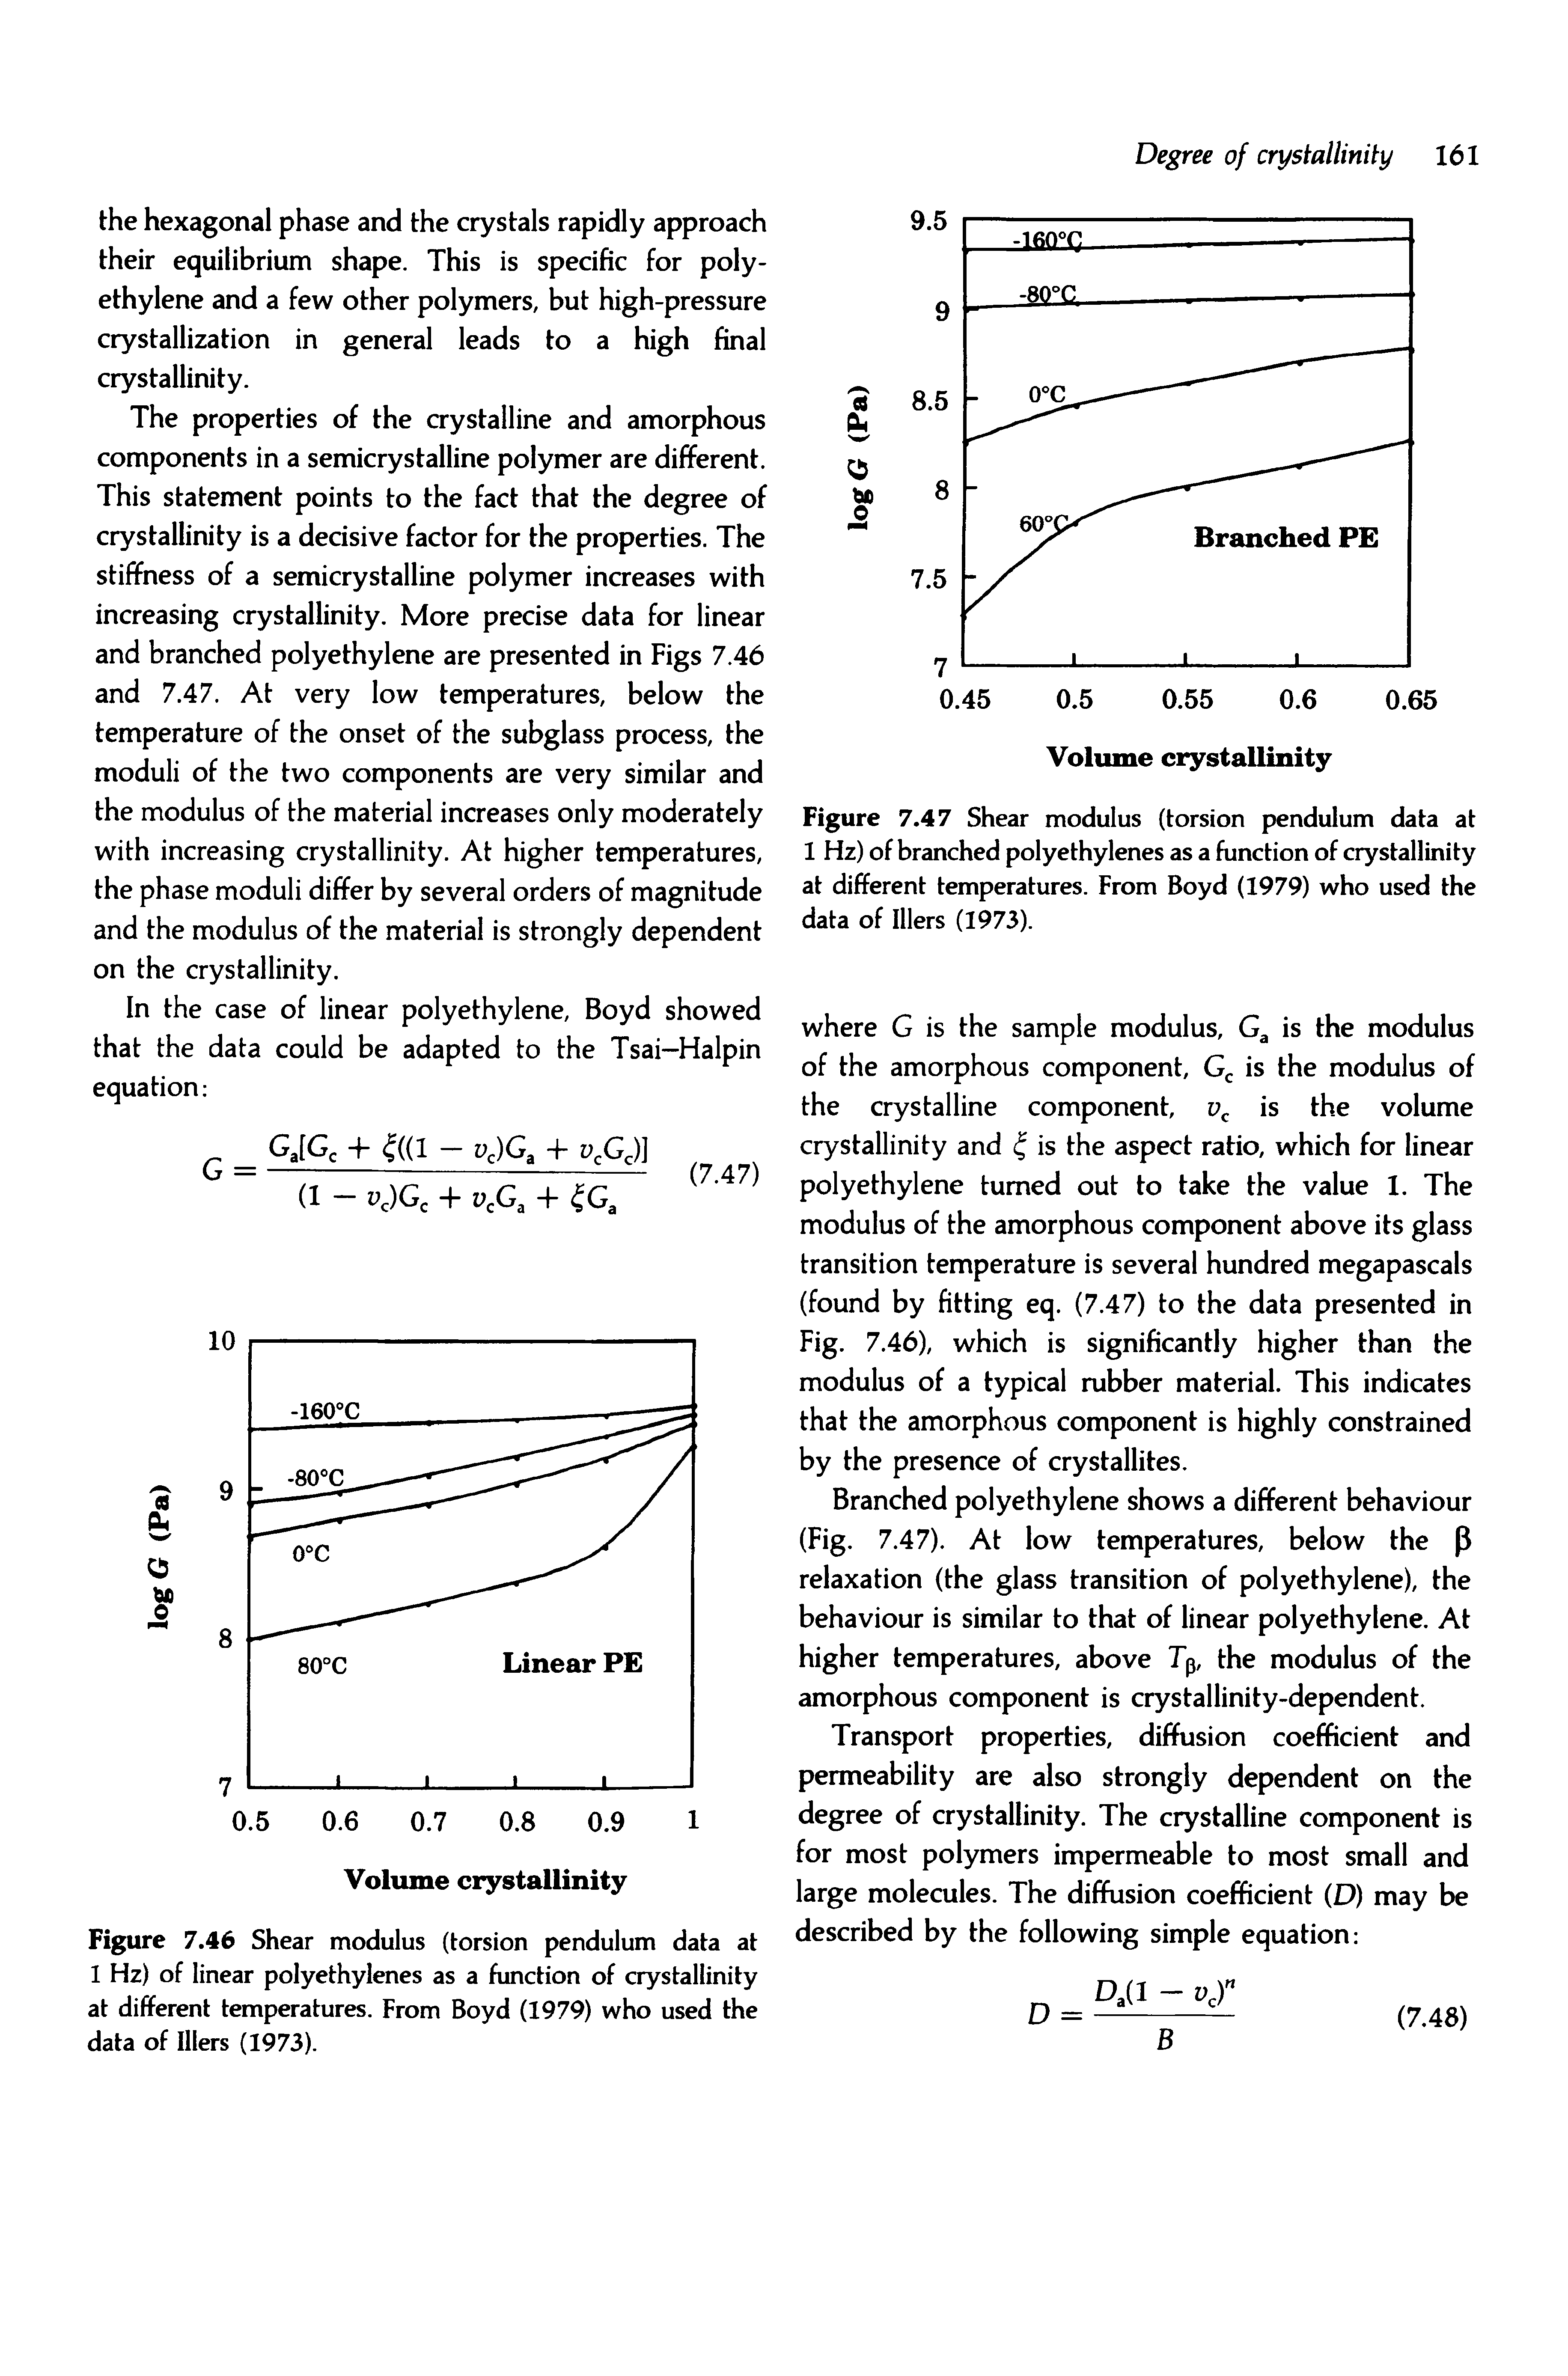 Figure 7.46 Shear modulus (torsion pendulum data at 1 Hz) of linear polyethylenes as a function of crystallinity at different temperatures. From Boyd (1979) who used the data of Illers (1973).